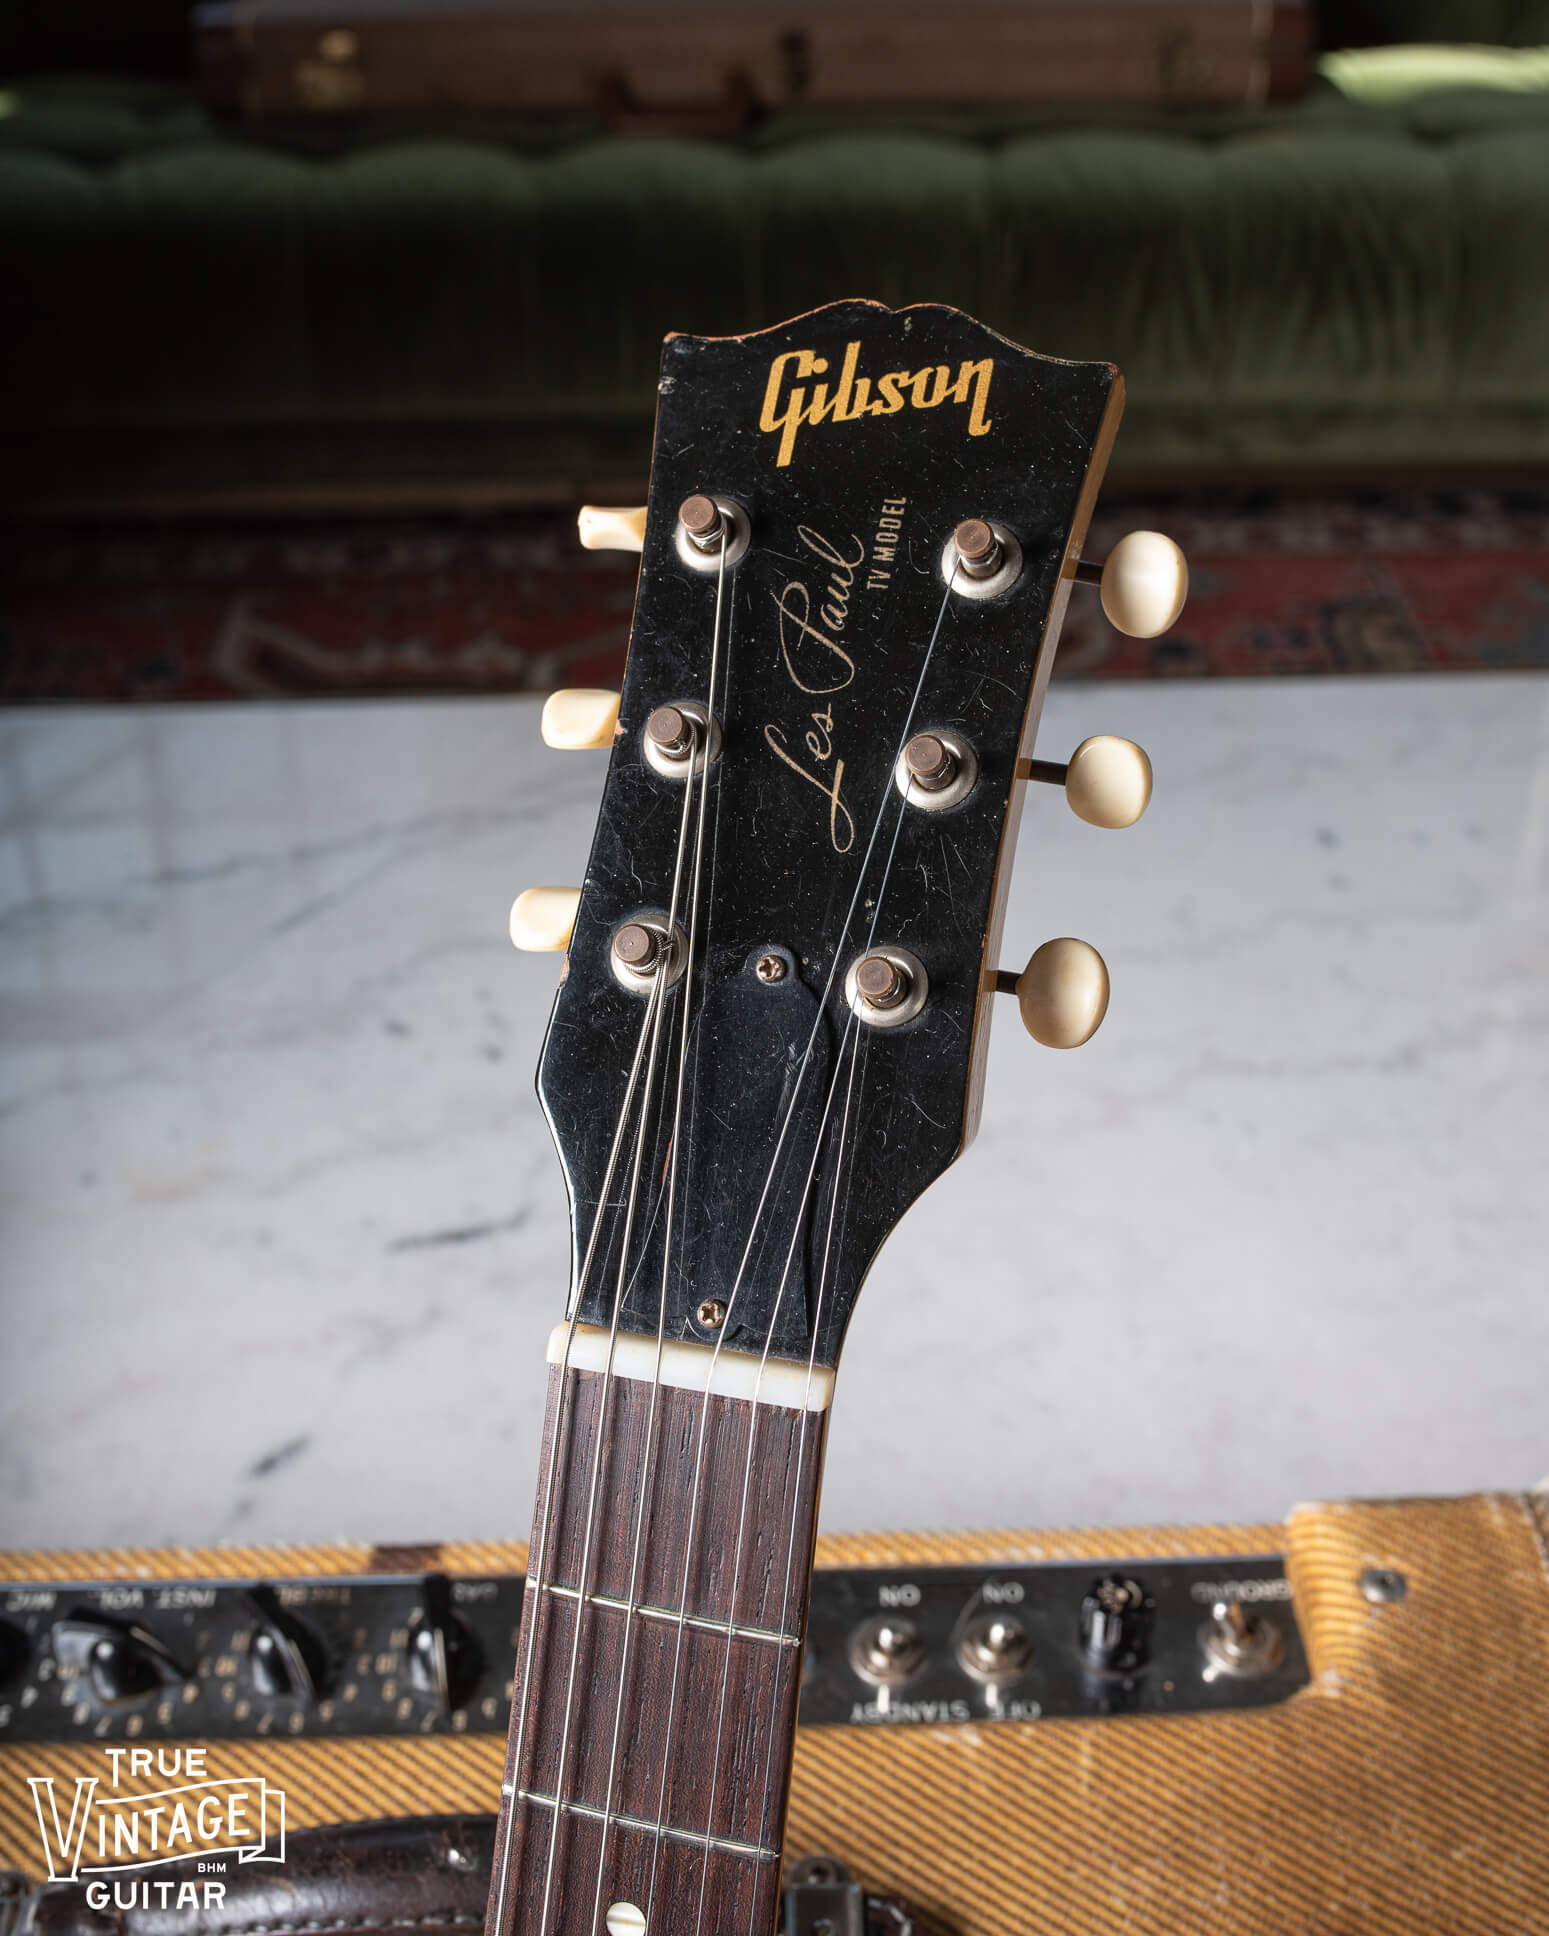 Gibson Les Paul TV model headstock with Les Paul signature and "TV Model" in silkscreen made in 1957